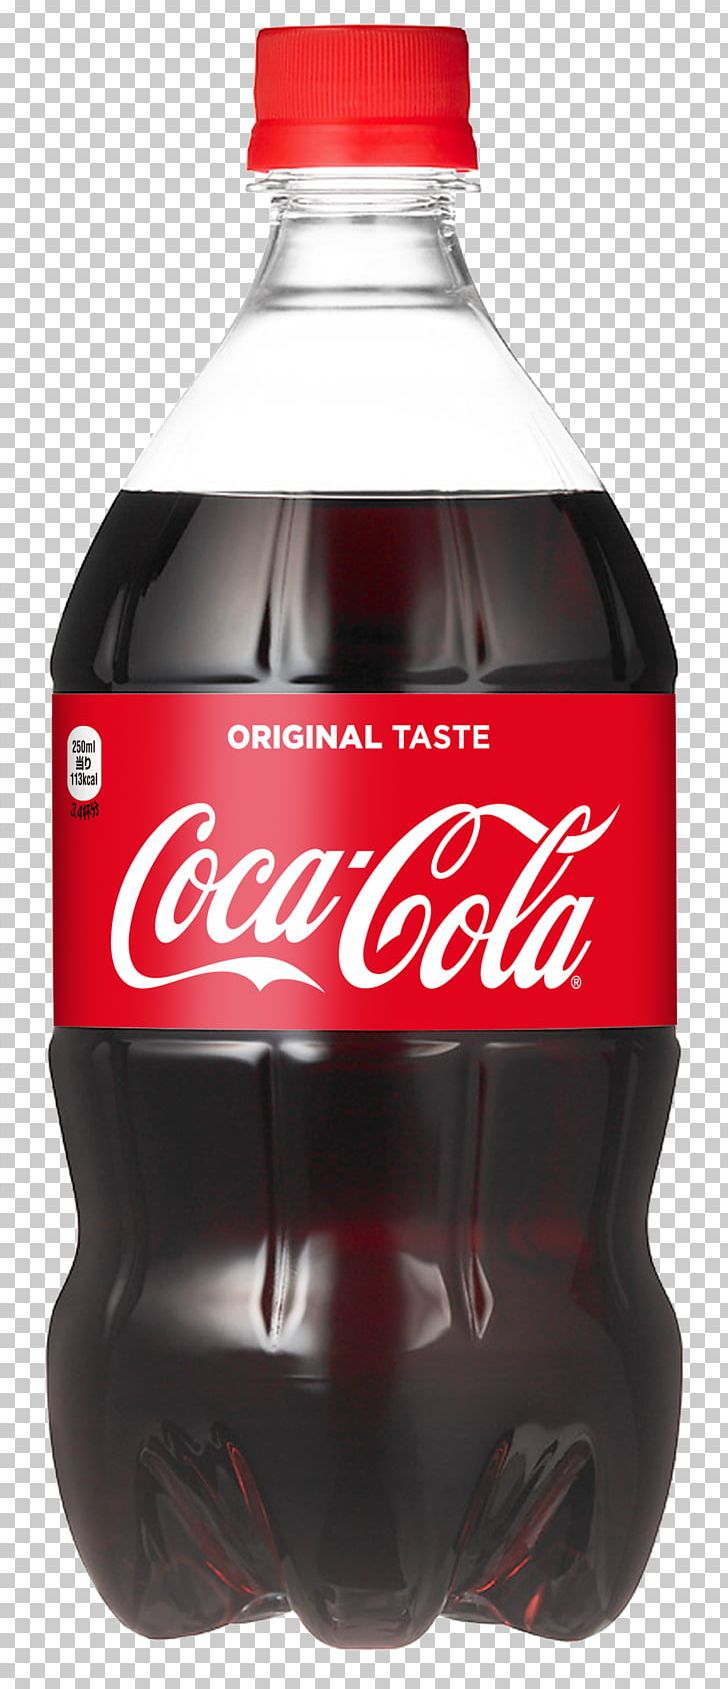 Coca-Cola Diet Coke Fizzy Drinks Pepsi PNG, Clipart, Bottle, Carbonated Soft Drinks, Coca, Coca Cola, Cocacola Free PNG Download